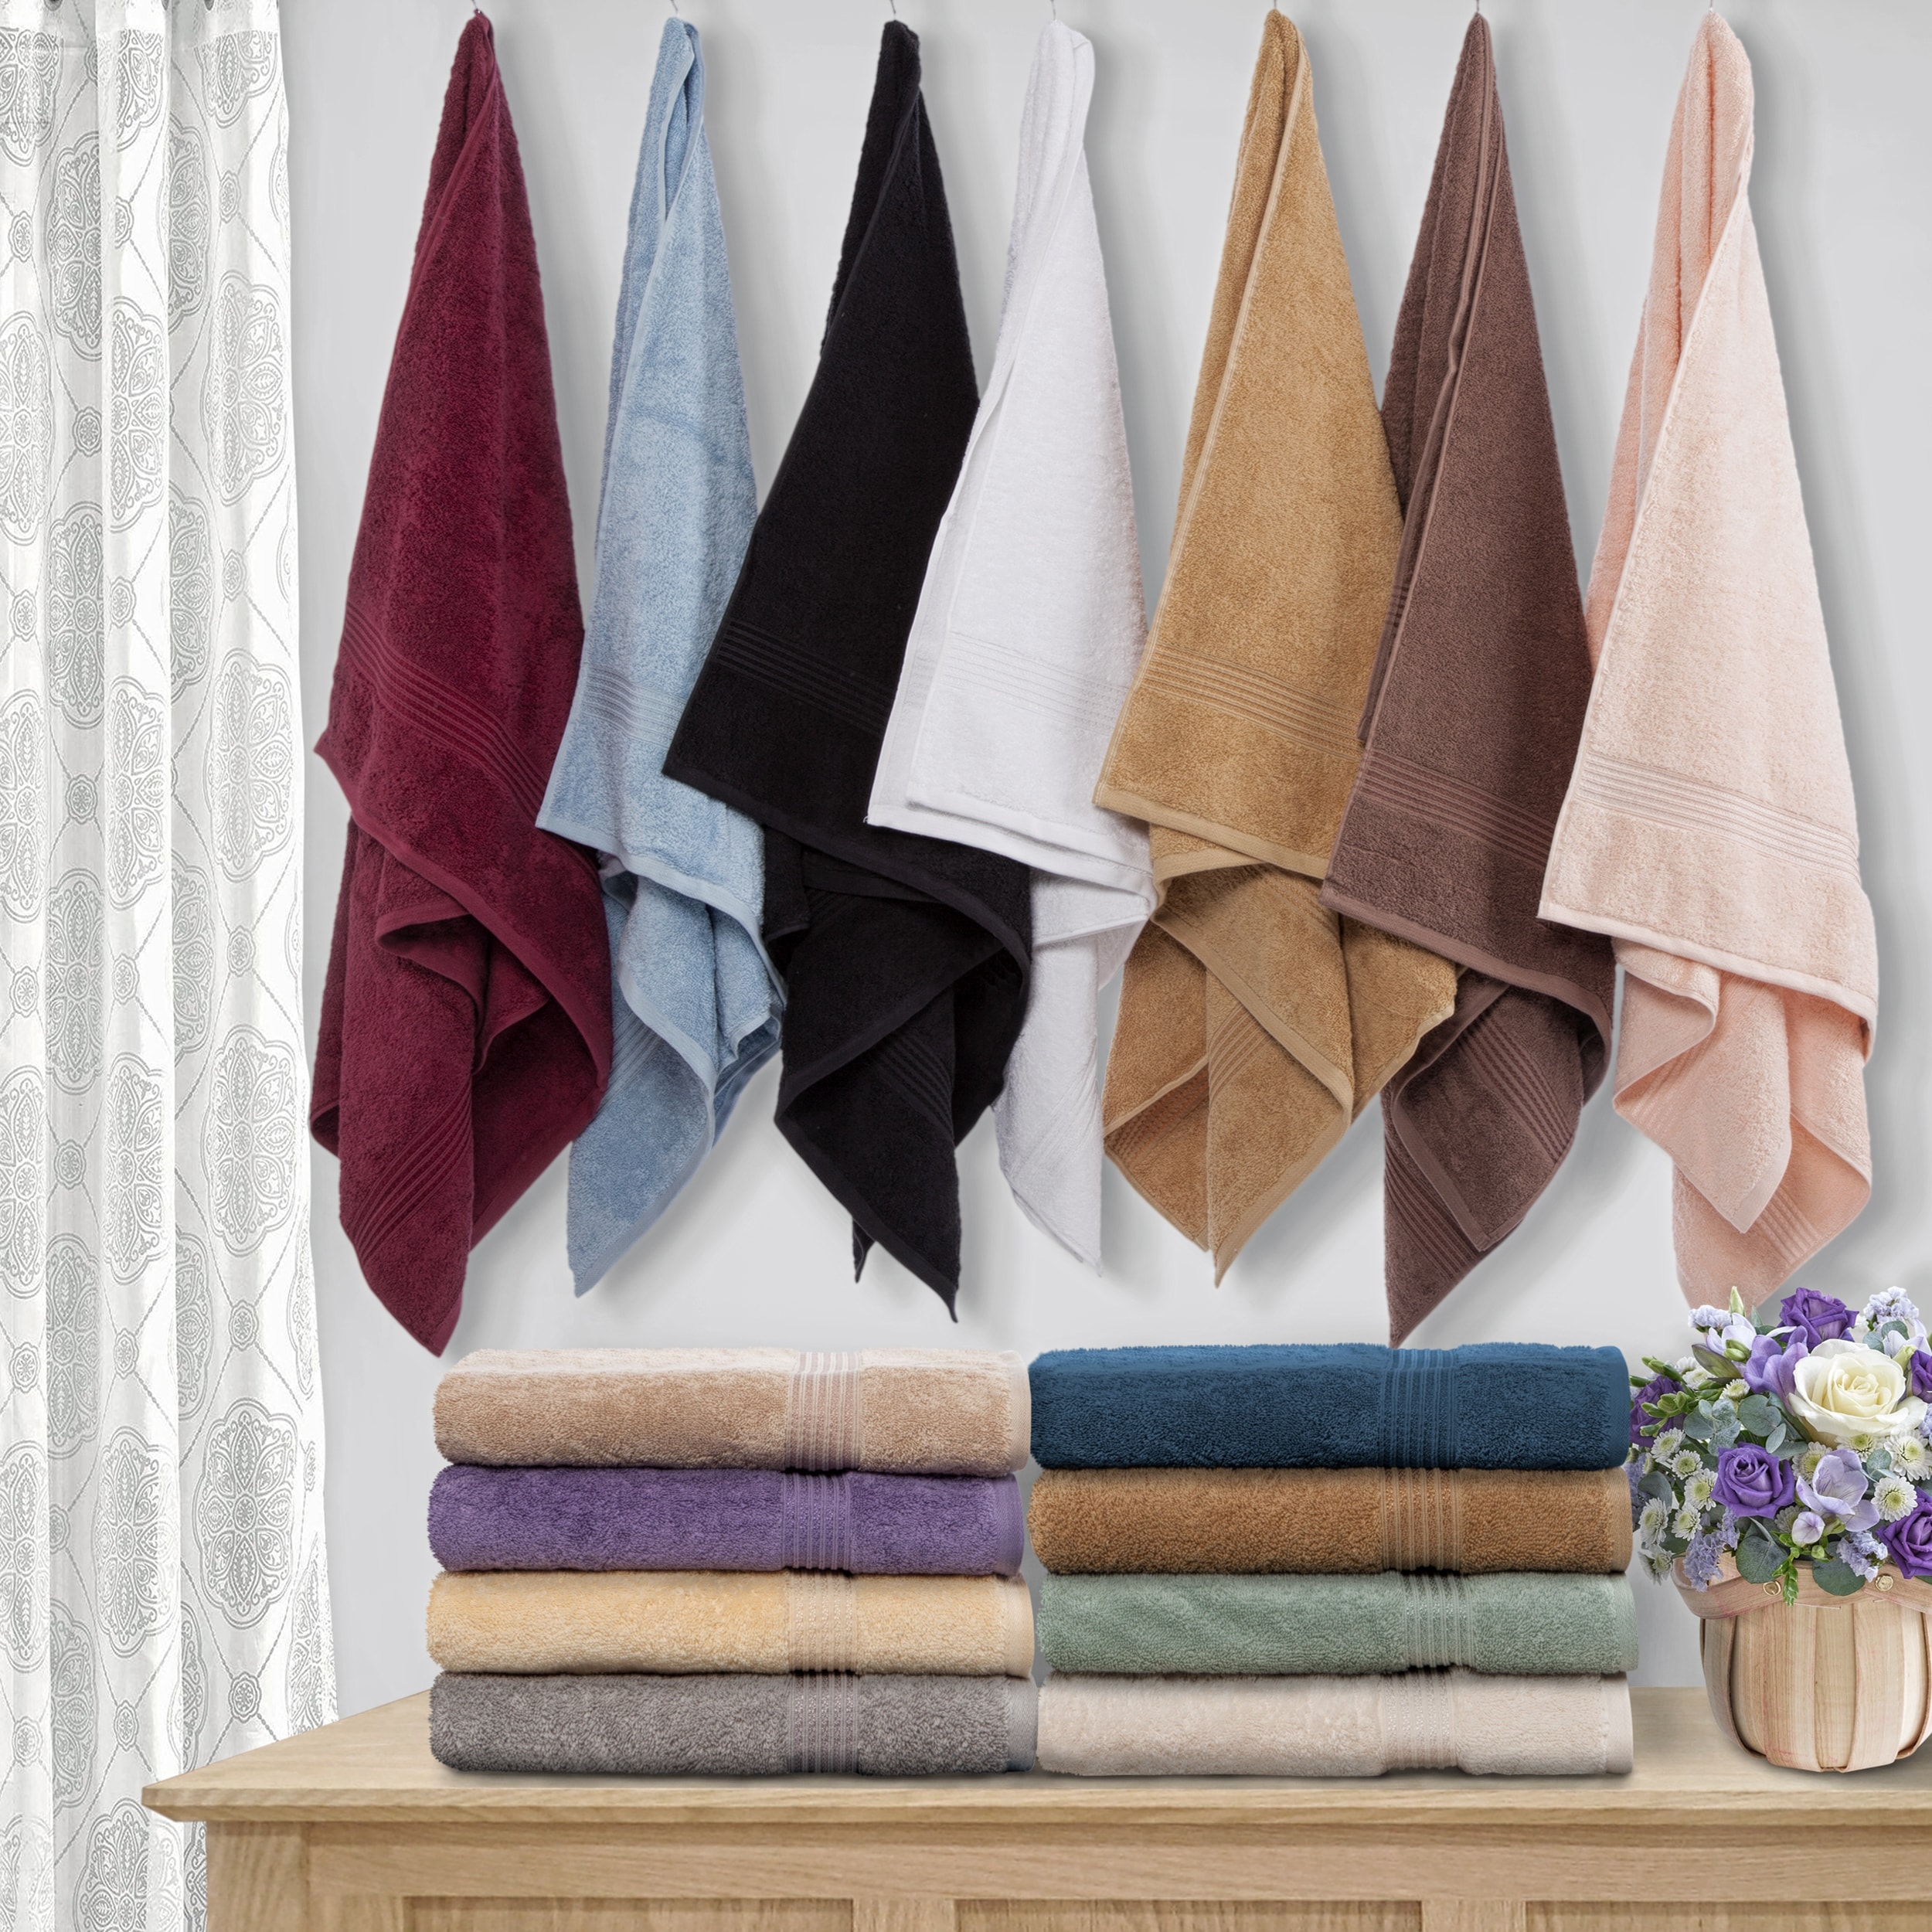 https://ak1.ostkcdn.com/images/products/is/images/direct/ddc2a79e600d6117ed1a04edcf634cc0346bd52f/Miranda-Haus-Ultra-soft-Combed-Egyptian-Cotton-Hand-Towels-%28Set-of-8%29.jpg